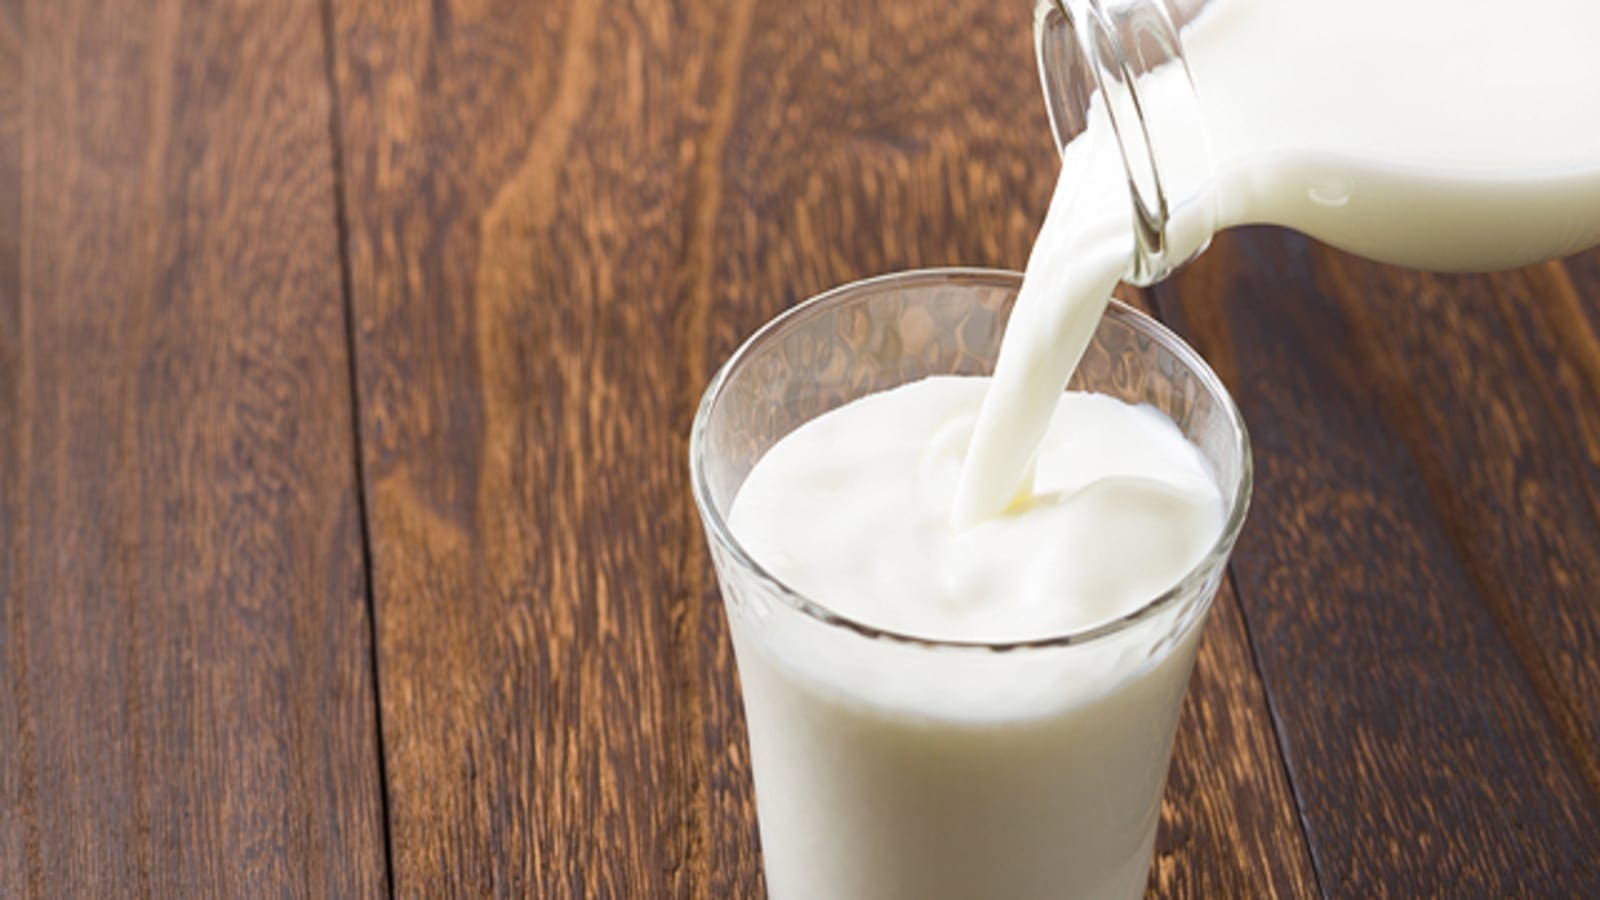 Dodla Dairy acquires Krishna Milks to expand presence in Indian dairy market 